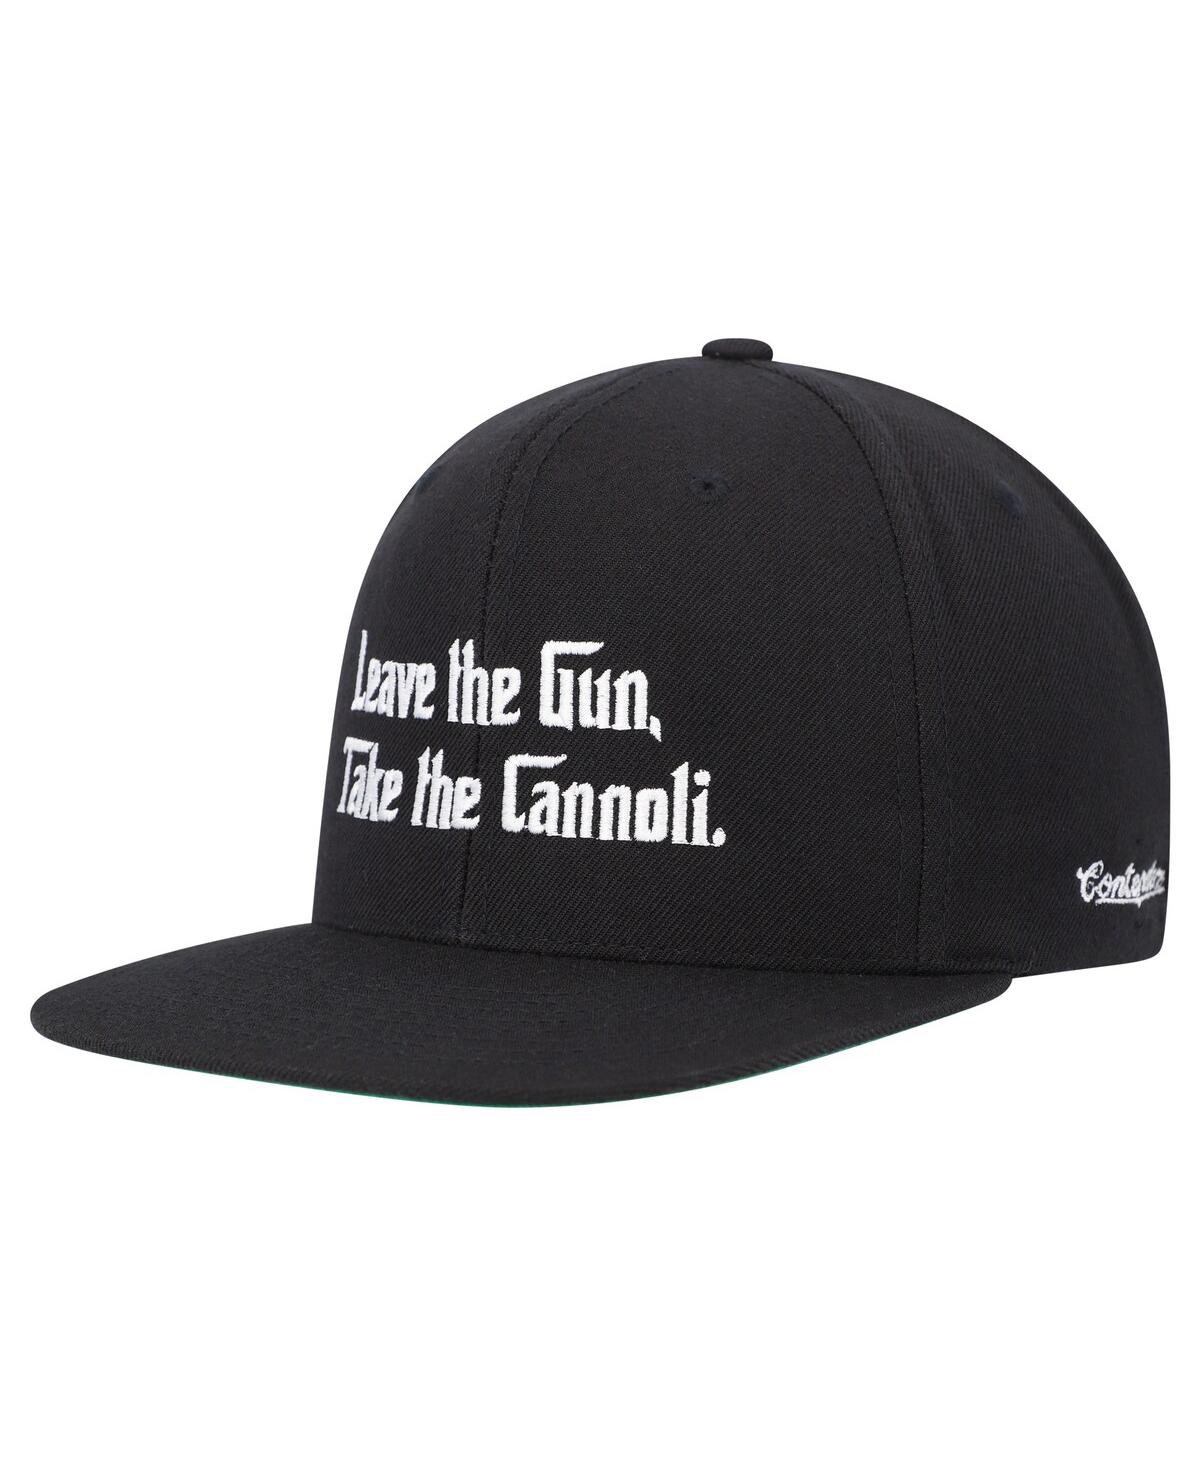 Men's and Women's Contenders Clothing Black The Godfather Leave the Gun, Take the Cannoli Snapback Hat - Black